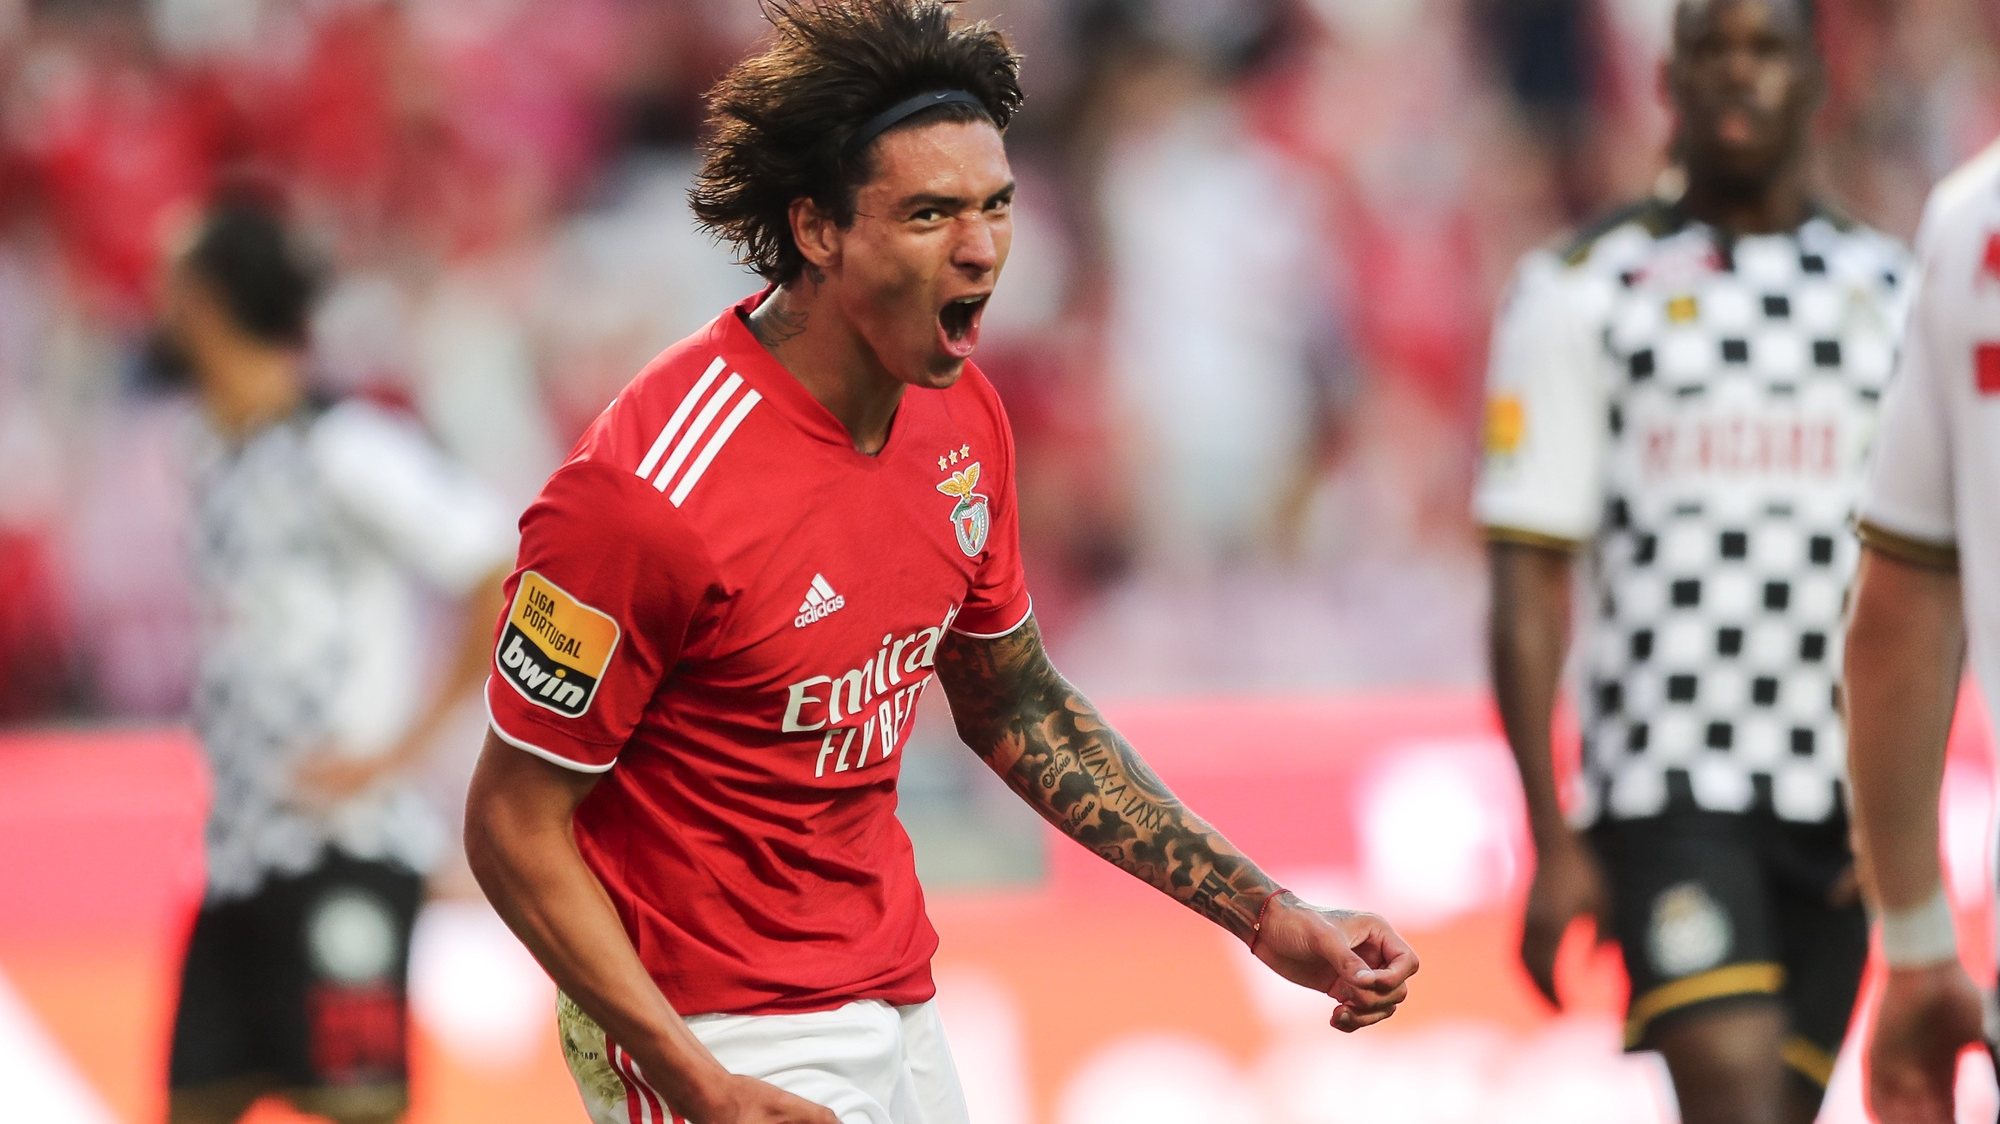 Benfica&#039;s Darwin Nunez celebrates after scoring a goal during the Portuguese First League soccer match between Benfica and Boavista at Luz Stadium in Lisbon, Portugal, 20 September 2021. MIGUEL A. LOPES/LUSA